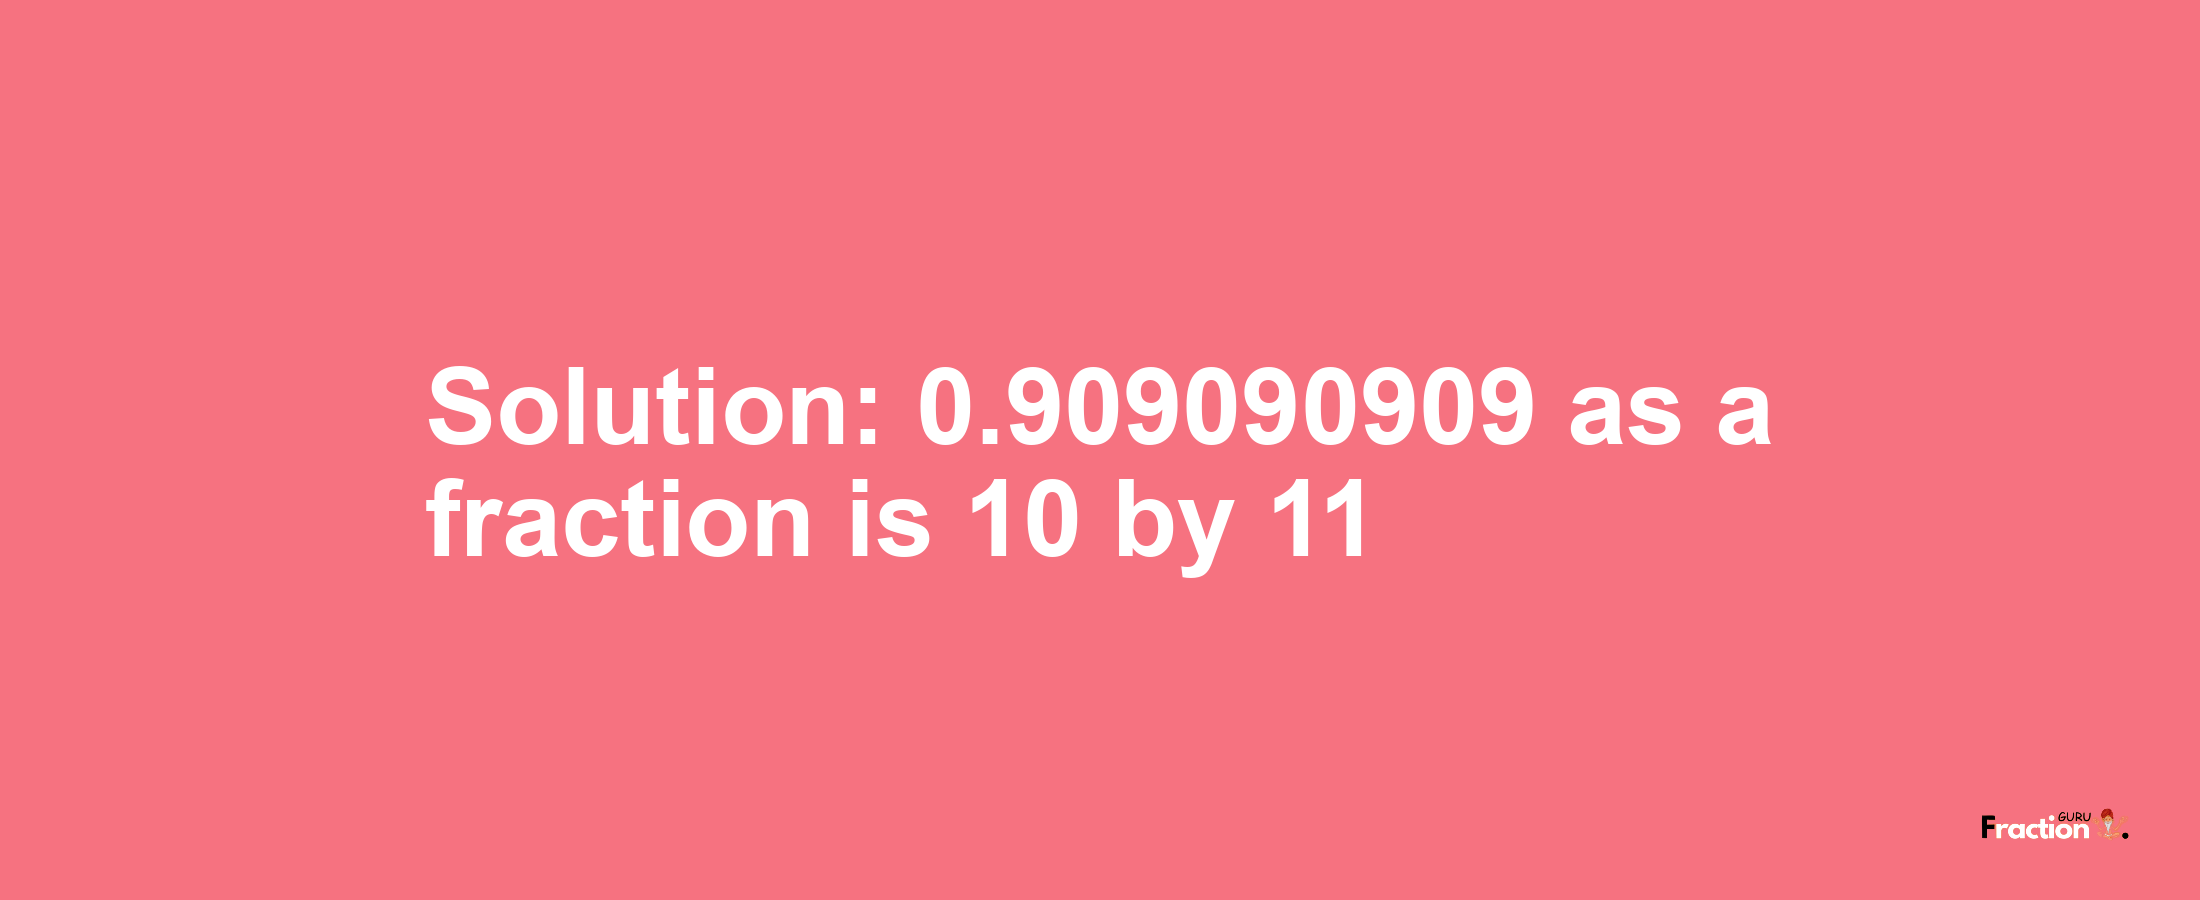 Solution:0.909090909 as a fraction is 10/11